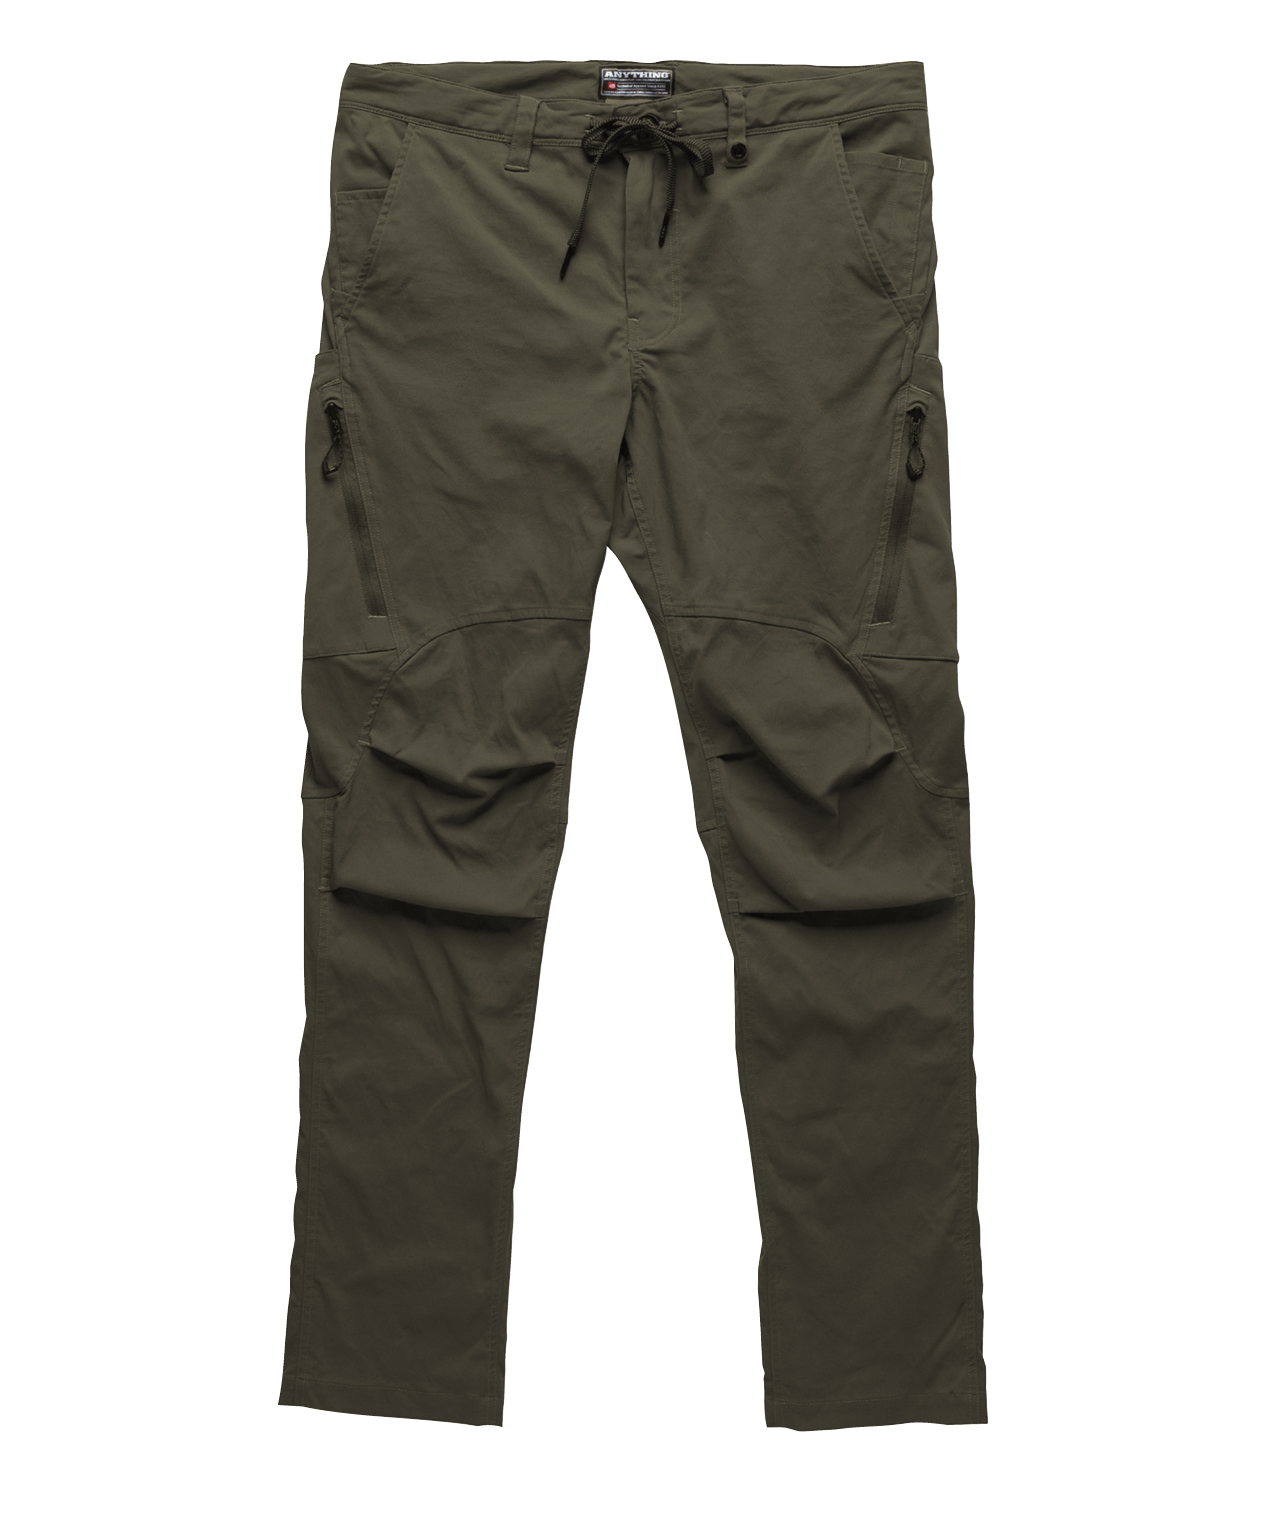 686 Anything Cargo Slim Fit Pant Dusty Fatigue Men's Pants 686 